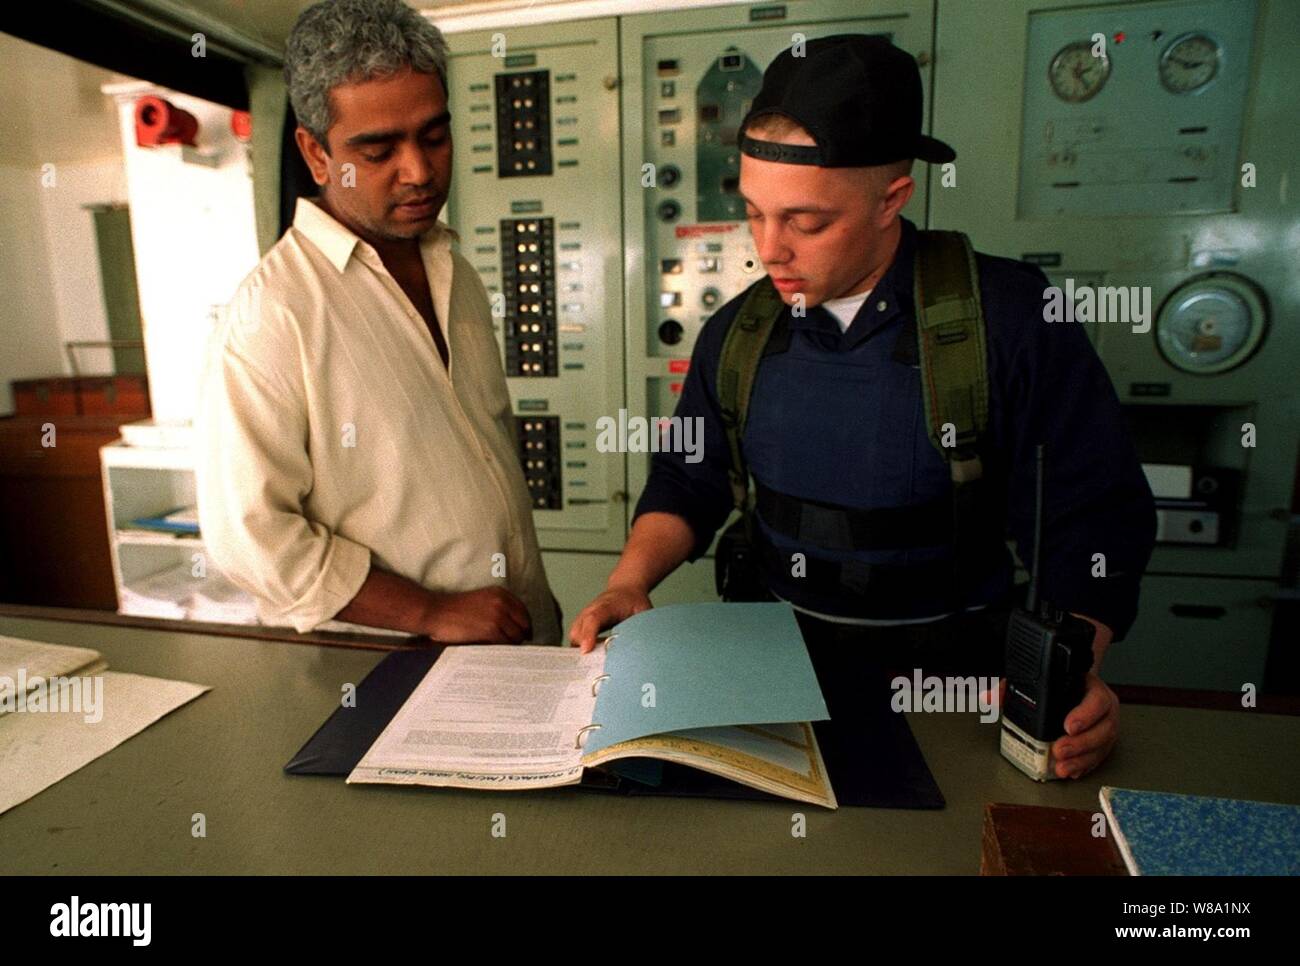 Lt. j.g. Vincent C. Watson (right) talks to the master (left) of an Iranian cargo ship as he inspects the shipХs documents during a maritime interdiction operation in the Persian Gulf on March 6, 1998.  Crew members from the USS John S. McCain (DDG-56) boarded and are inspecting the ship for possible contraband.  The Arleigh Burke class destroyer is conducting the interception operations as part of a force augmentation in the region. The McCain is home ported in Yokosuka, Japan. Stock Photo